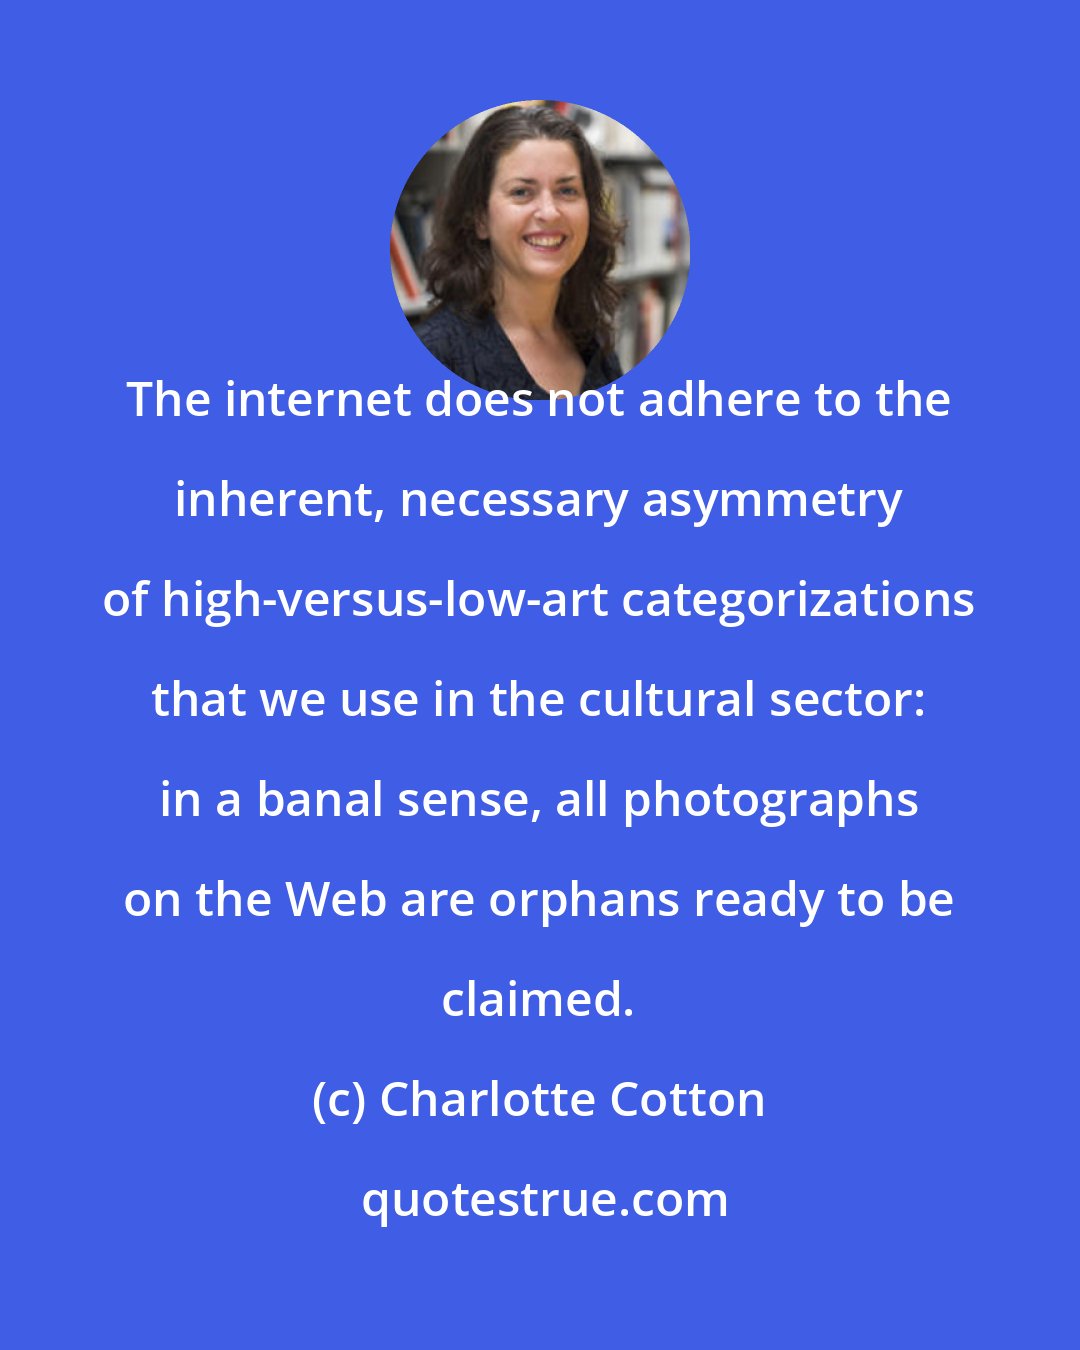 Charlotte Cotton: The internet does not adhere to the inherent, necessary asymmetry of high-versus-low-art categorizations that we use in the cultural sector: in a banal sense, all photographs on the Web are orphans ready to be claimed.